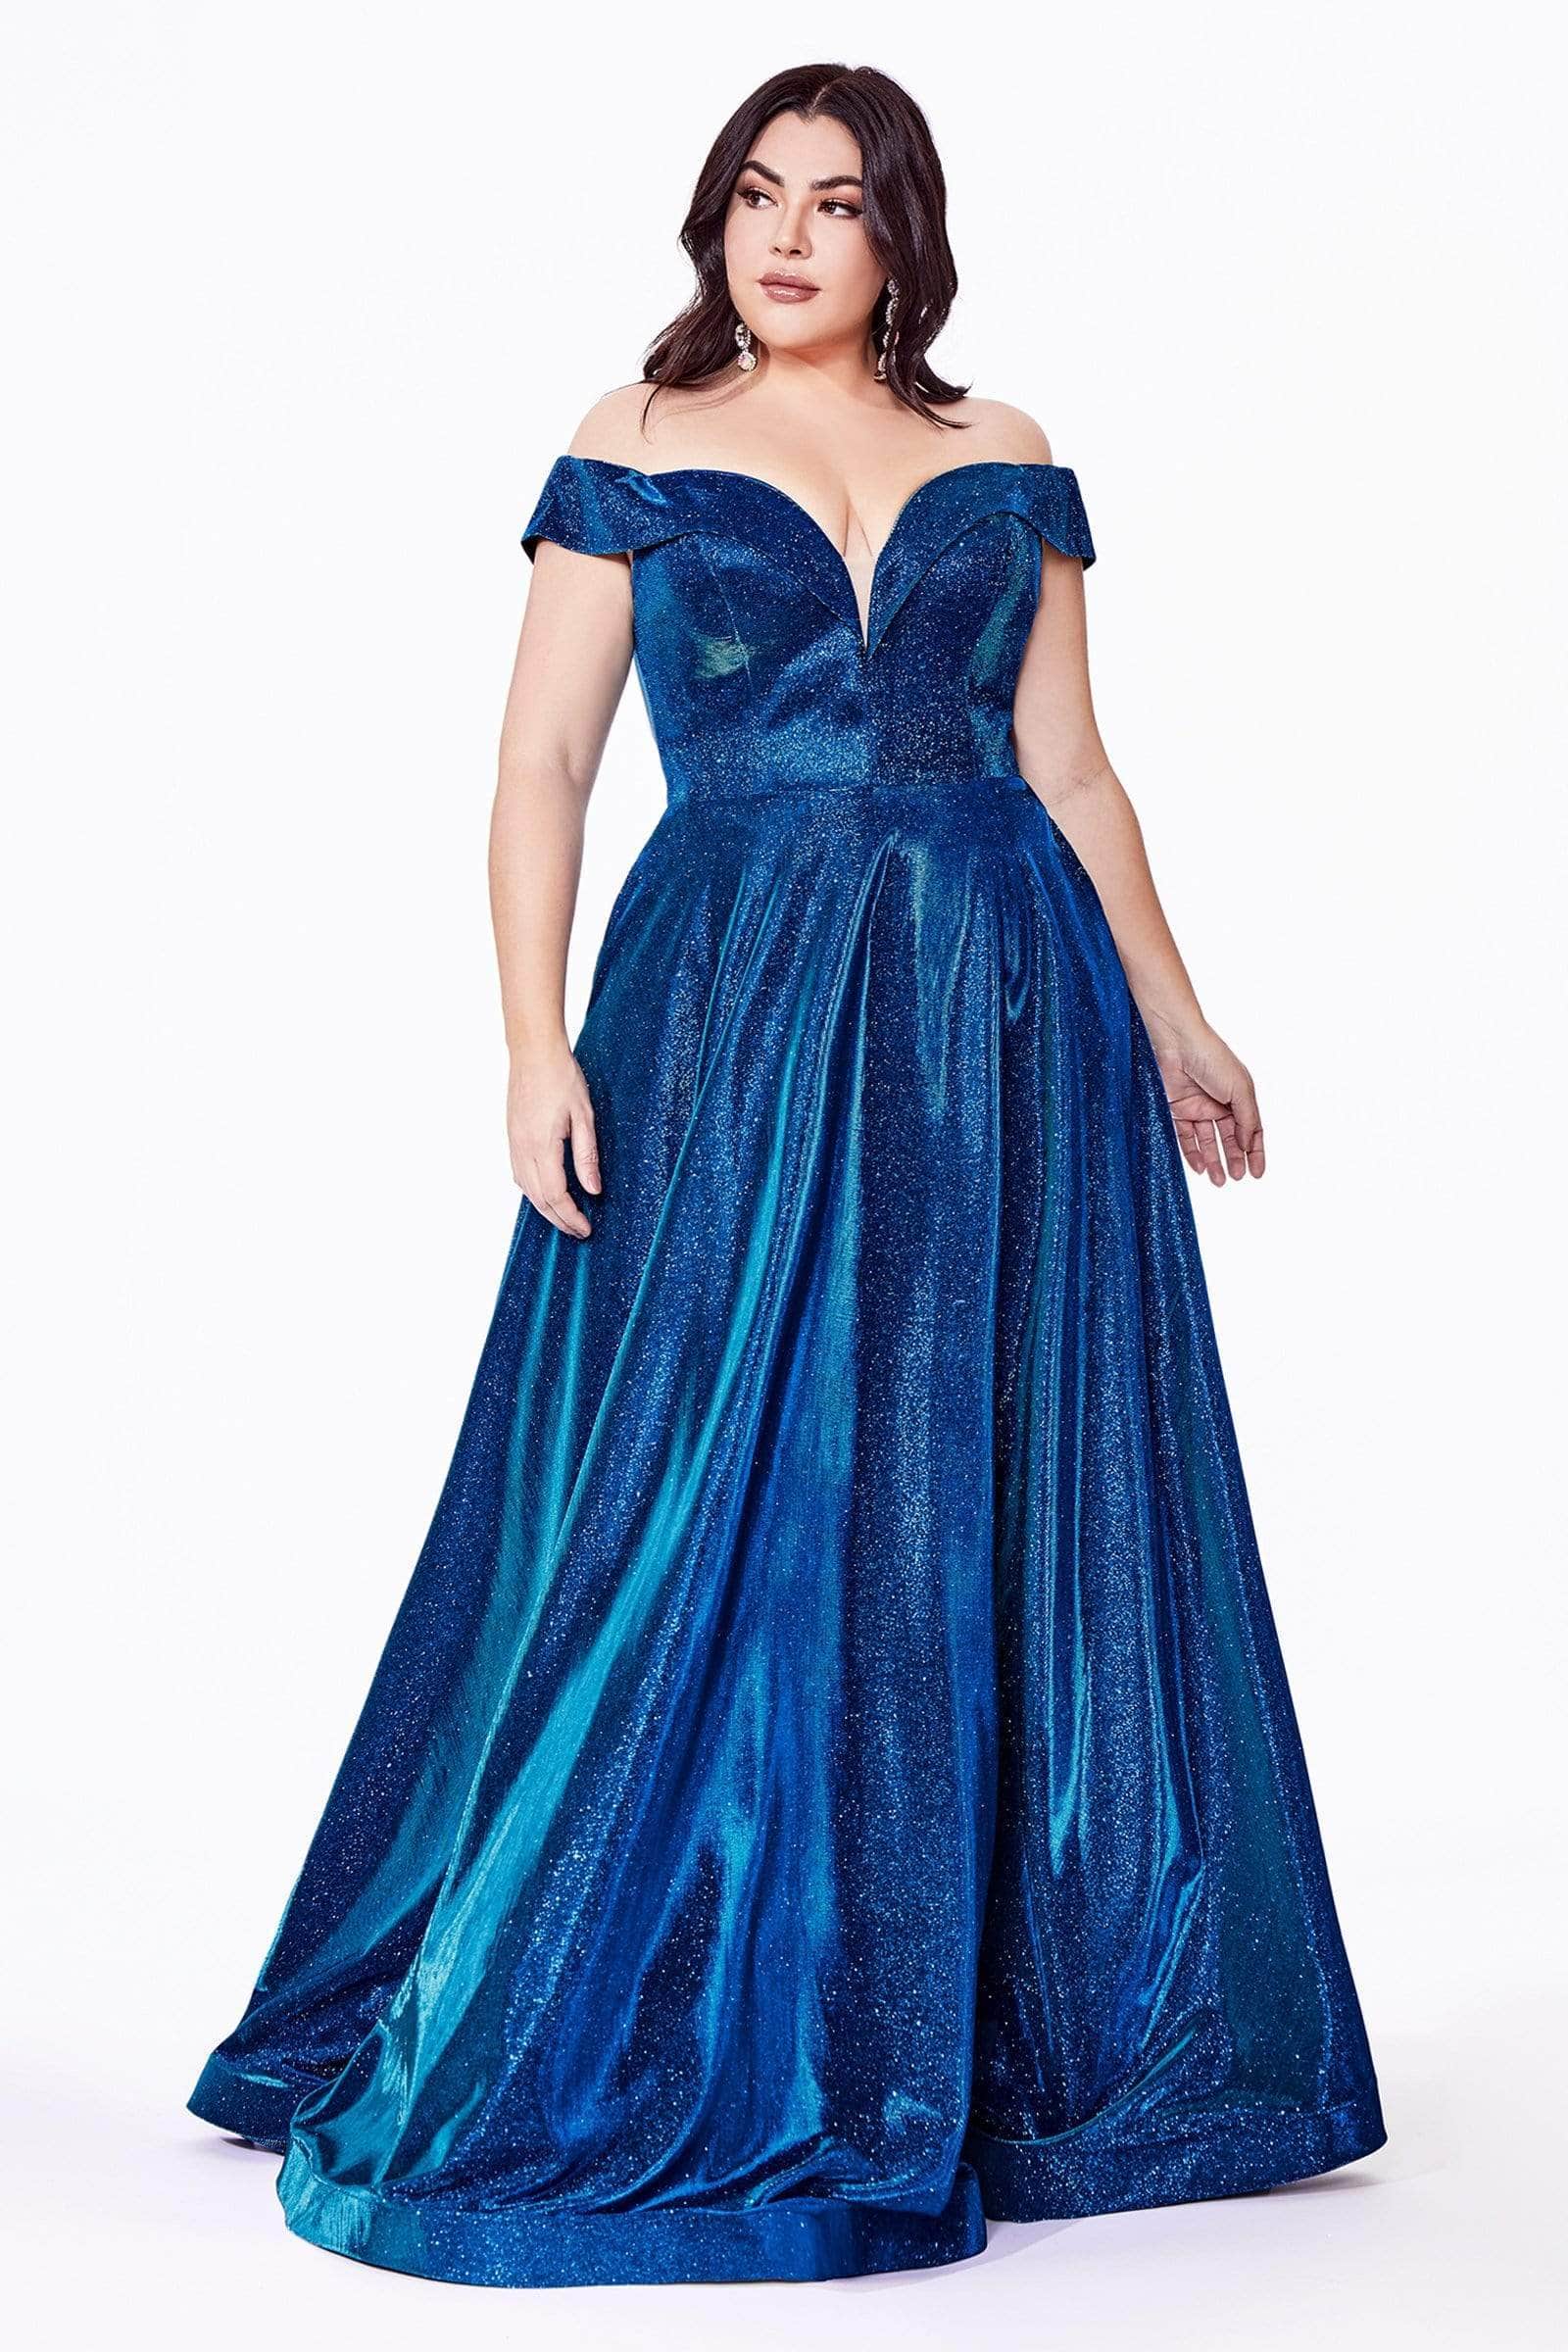 Image of Ladivine CD210C - Glitter Metallic One Shoulder A-Line Gown